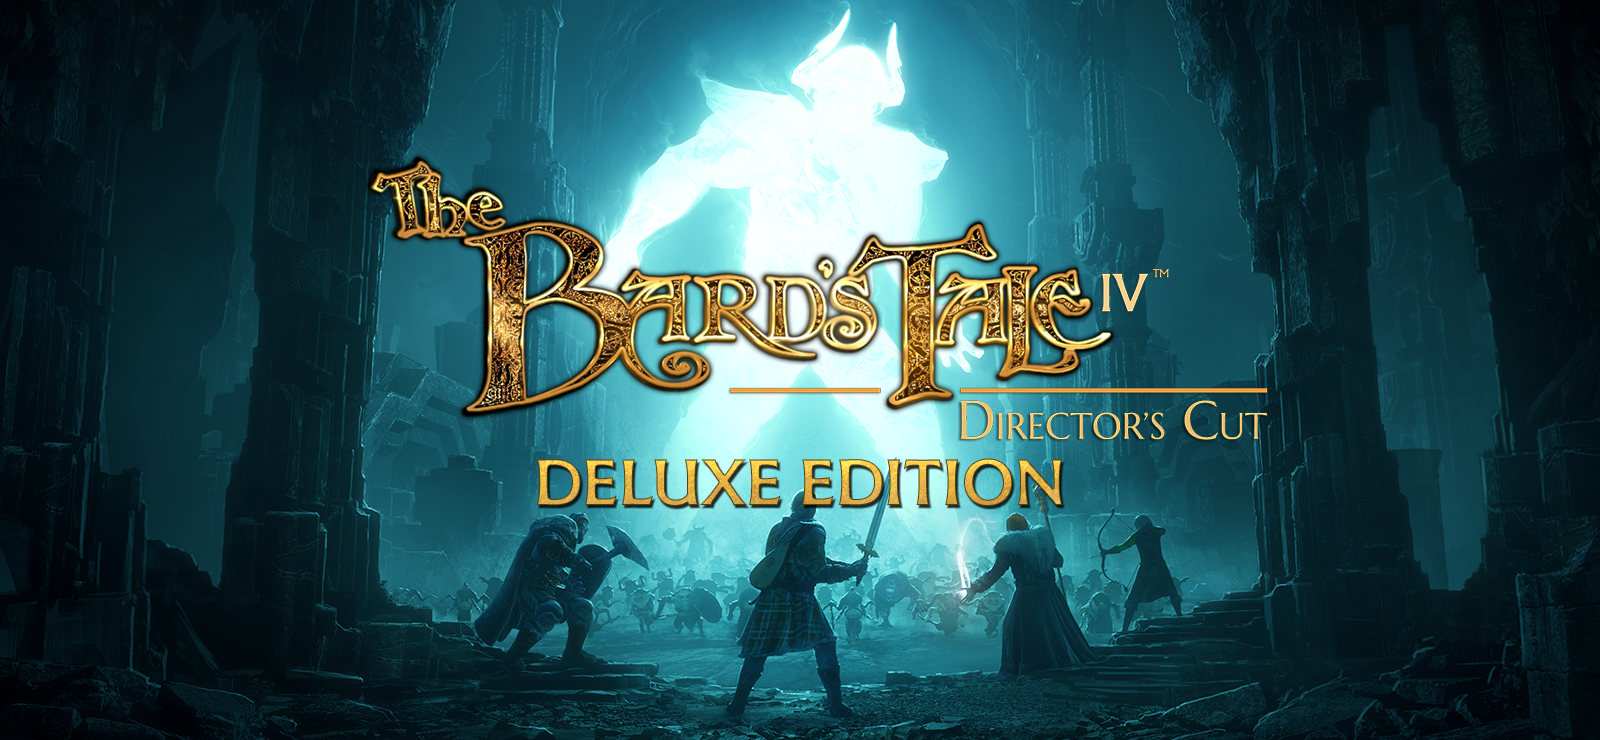 The Bard's Tale IV: Director's Cut - Deluxe Edition